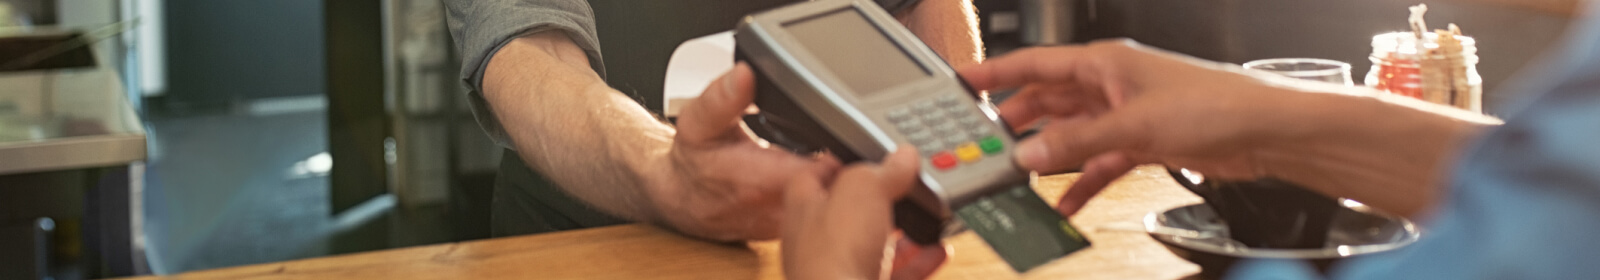 Close up of hands using a payment processor machine